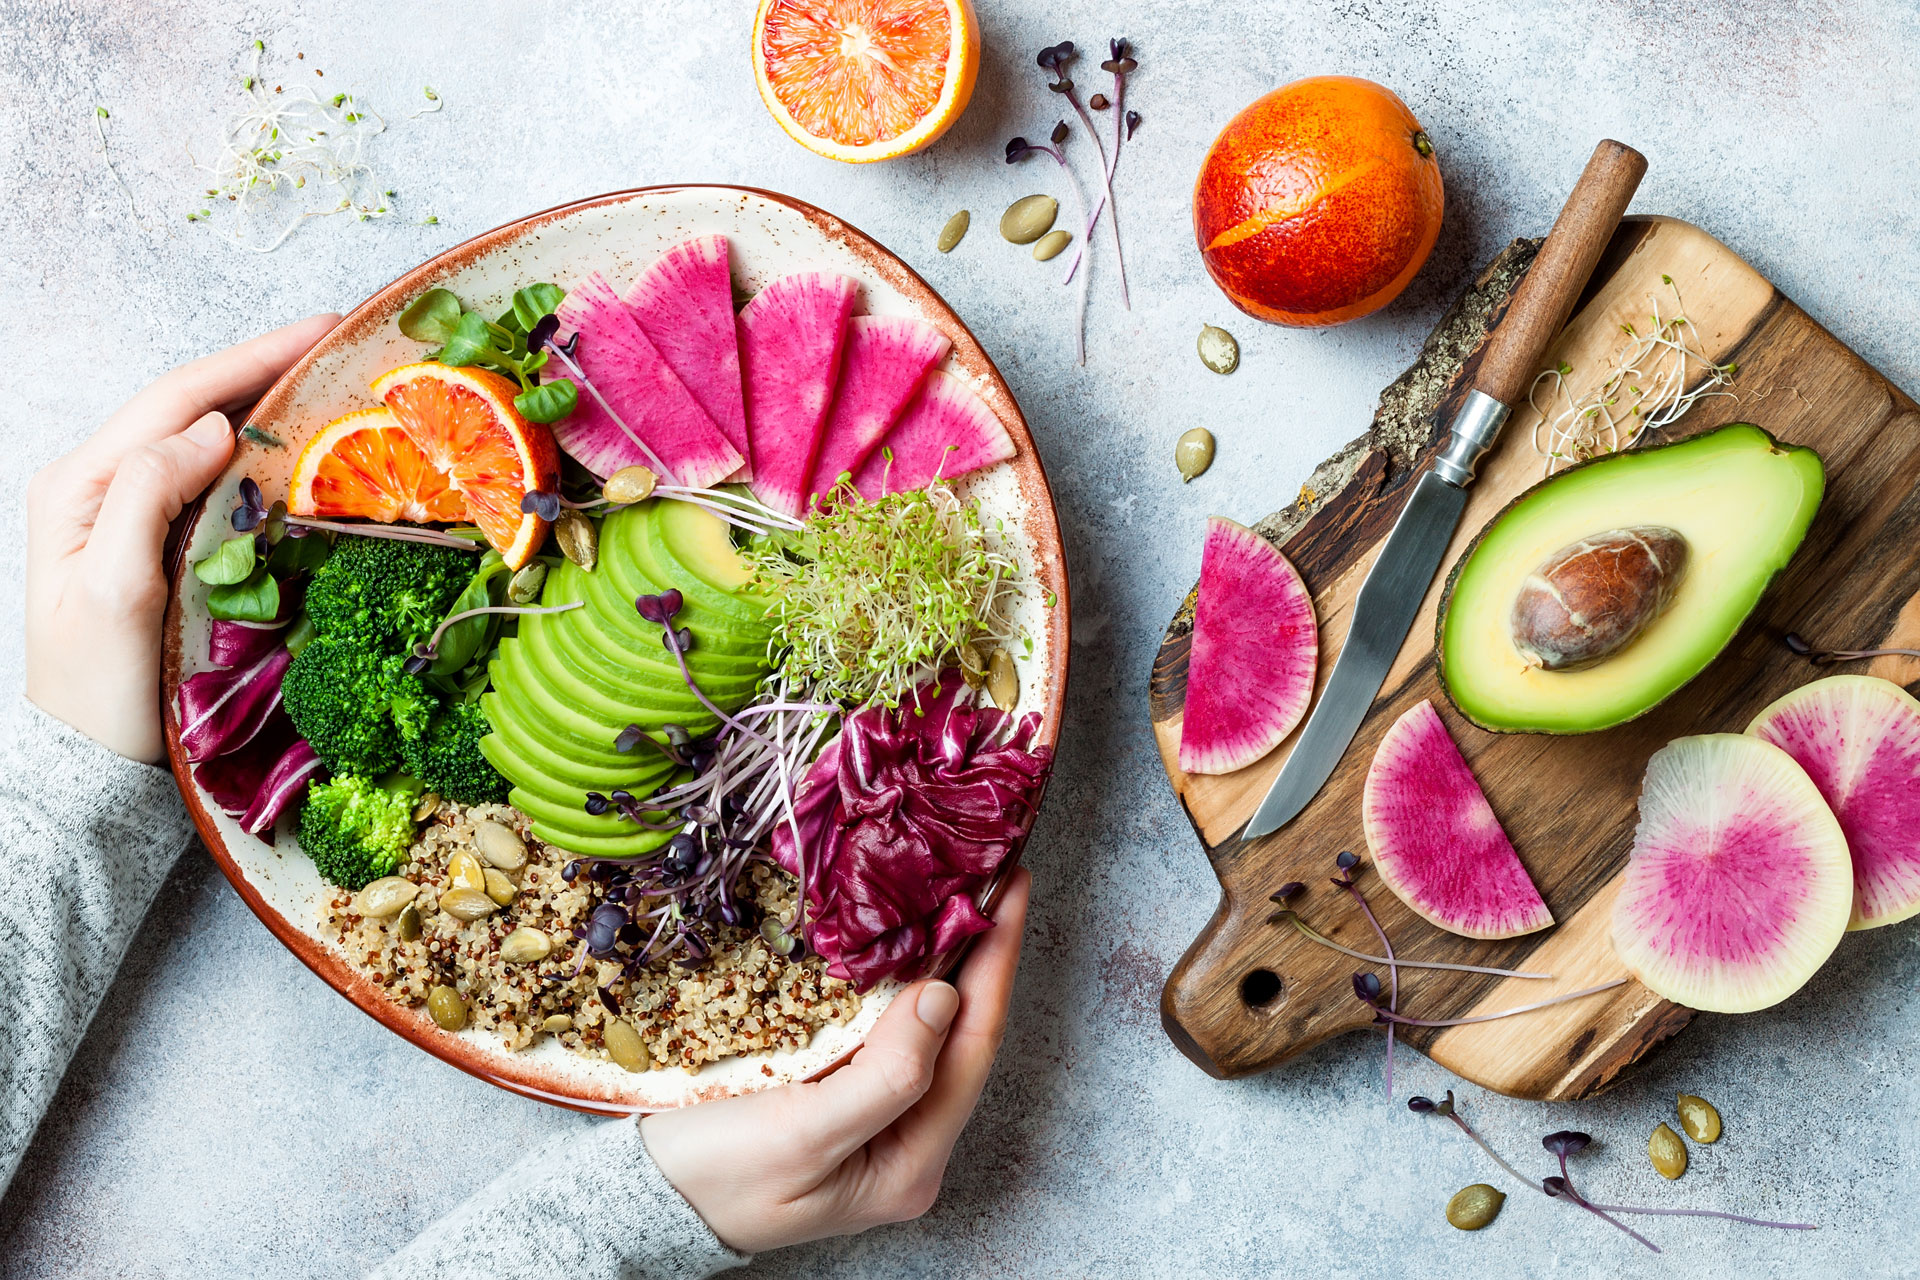 Veganuary: A Nutritionist’s Guide To Going Vegan